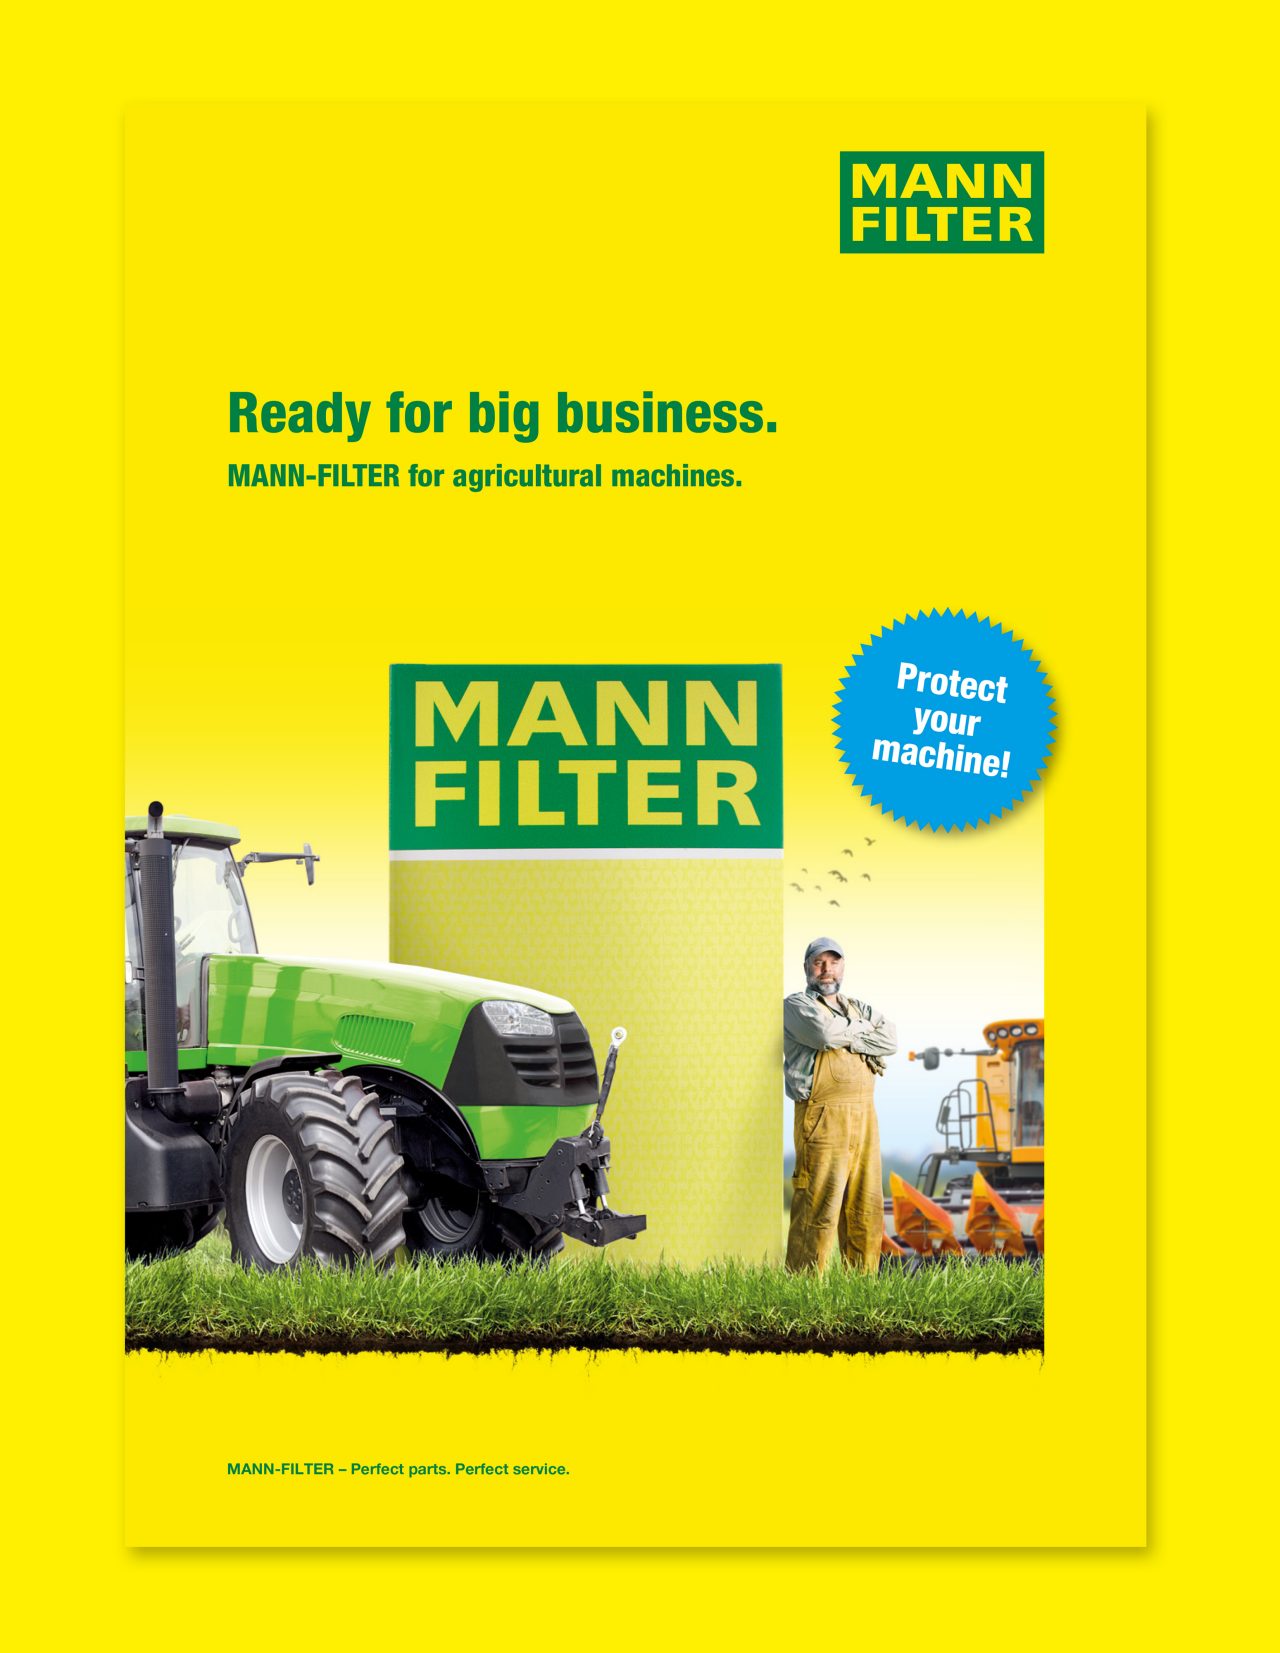 Discover the MANN-FILTER products for agricultural machines